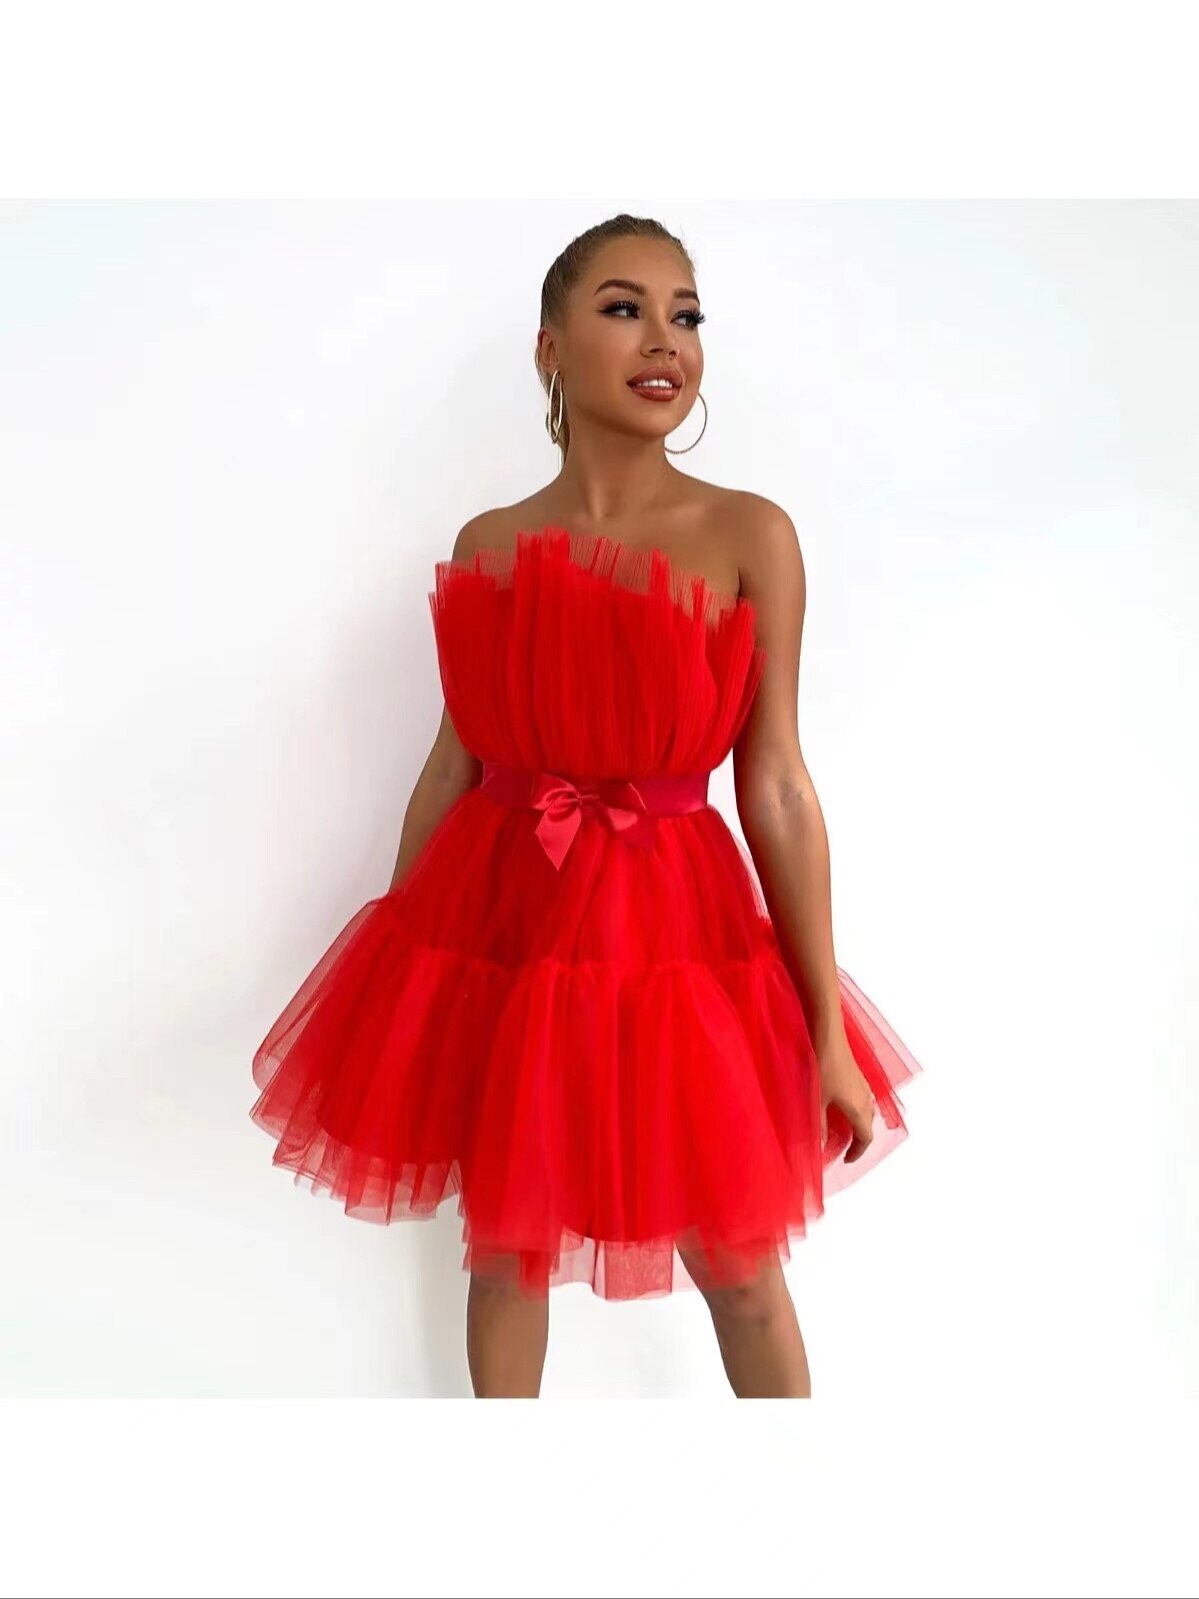 Mesh Solid Bow Mini Dress Women Layered Strapless Ball Gown Sexy Party Club Dress Backless Summer Dress The Clothing Company Sydney